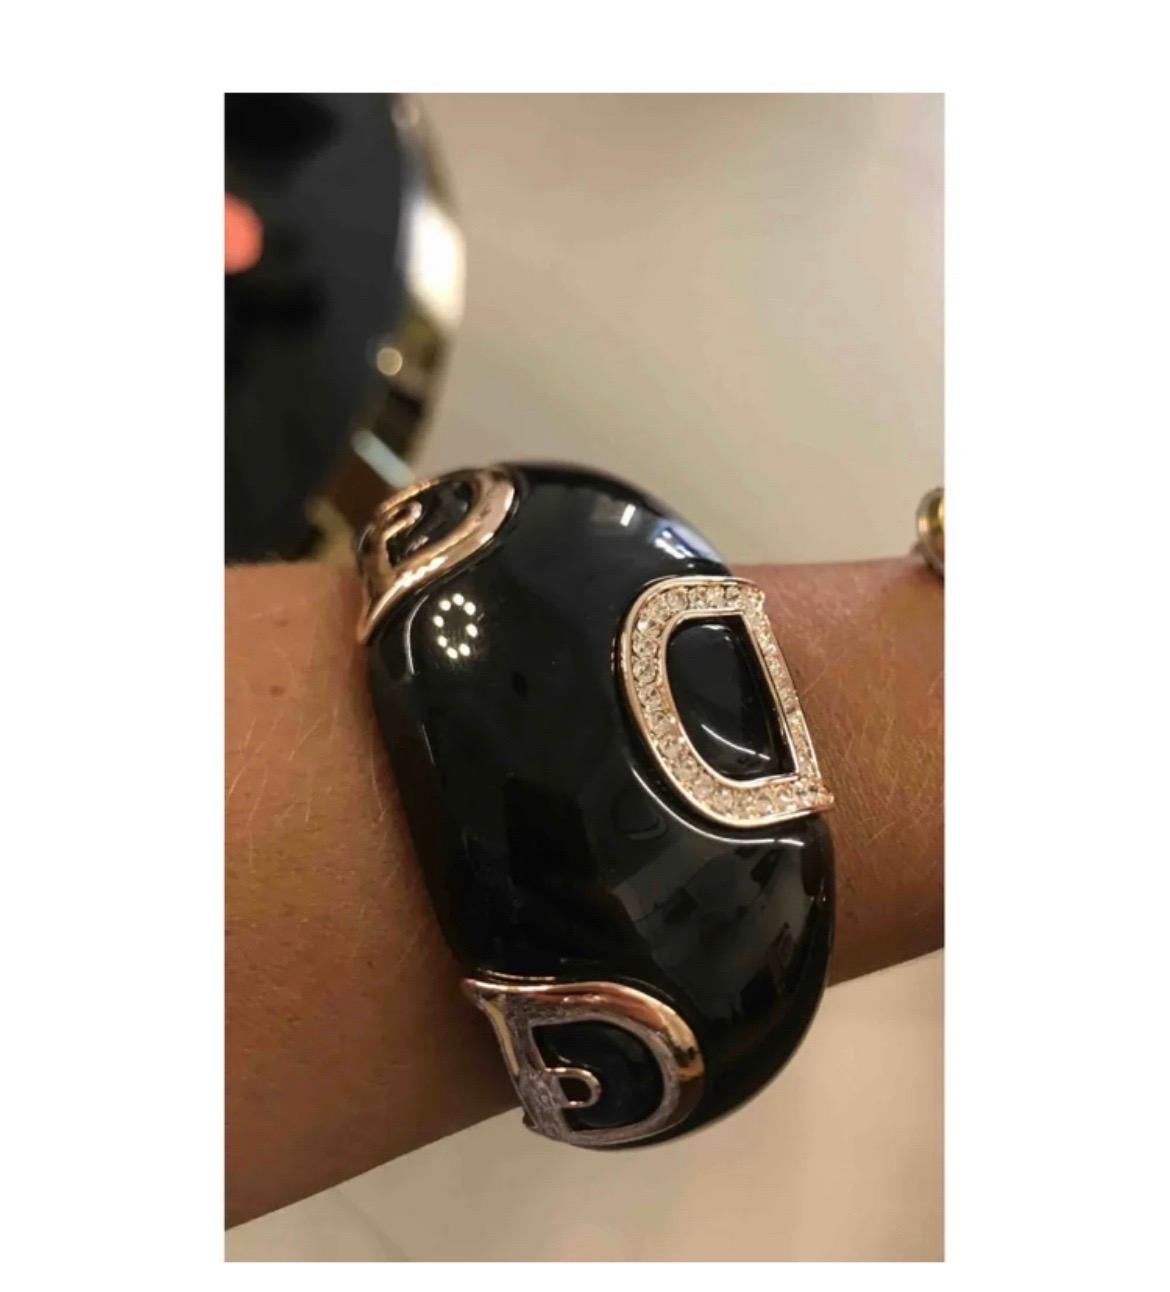 Vintage Dior bracelet in horn, logo with crystals, diameter 6 cm. Micro scratches visible very closely, however its condition is excellent.